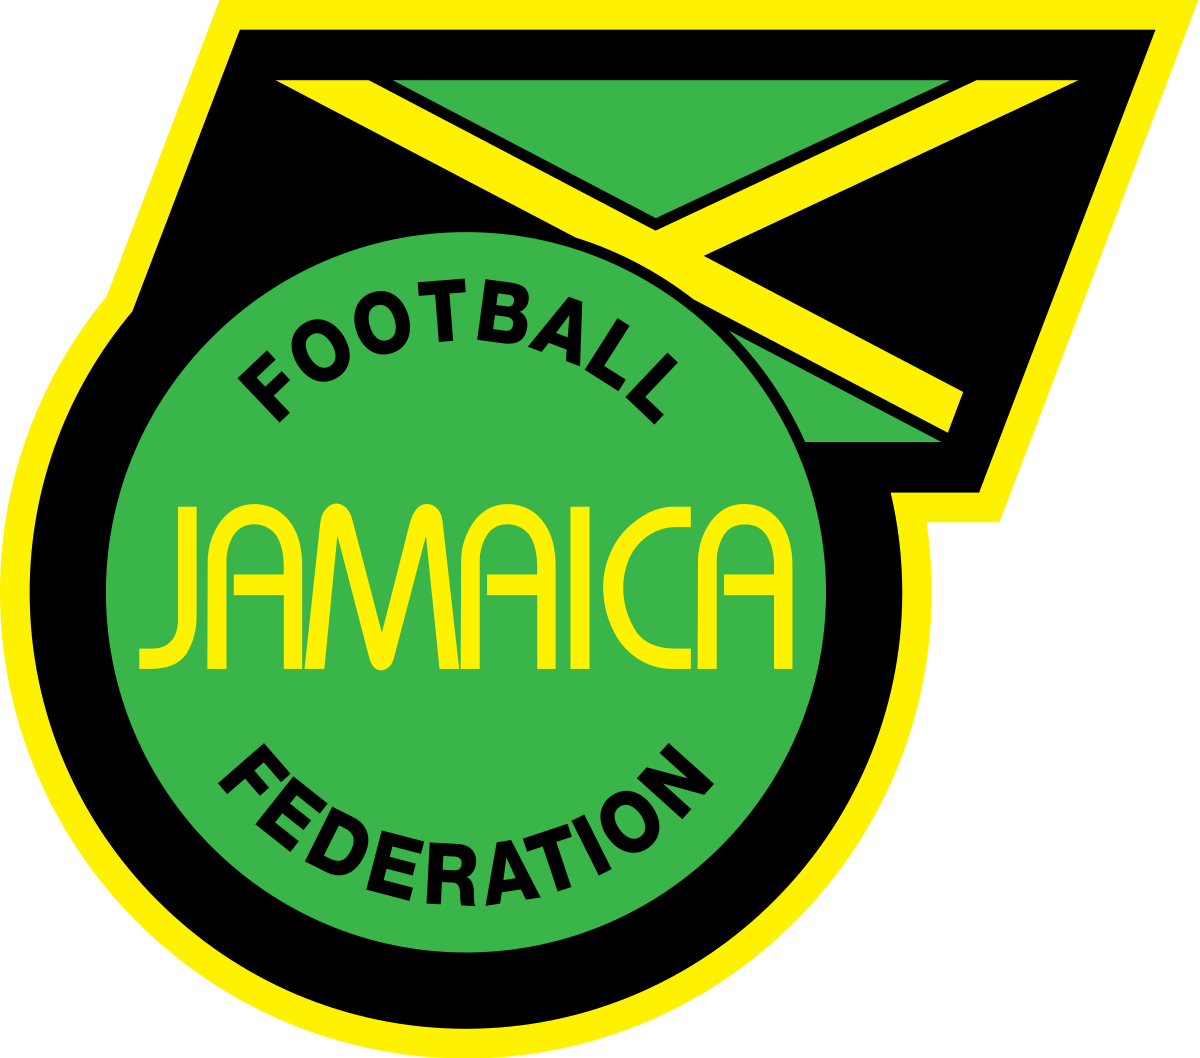 The logo for the Jamaican Football Federation. This logo is used for all nation teams and has been in use since 1910.